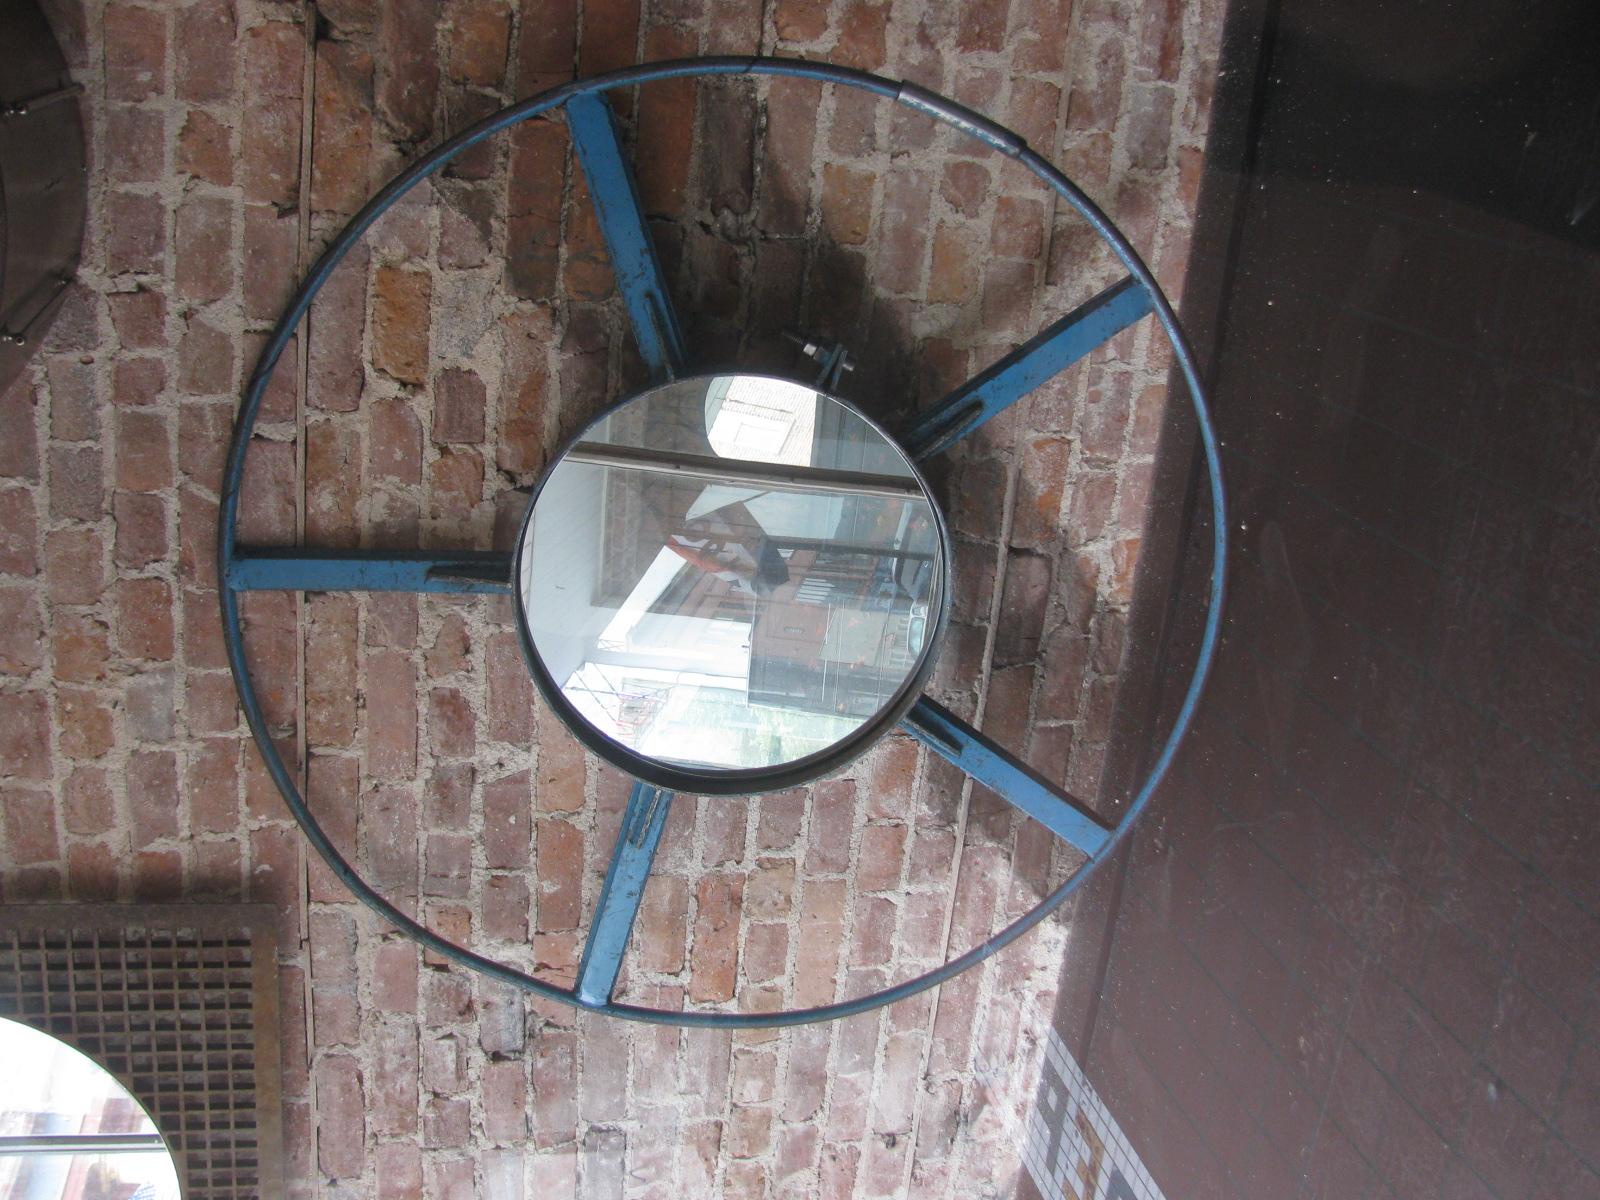 Spectacular mirror created from a Industrial wheel in fabulous blue paint. All original with a new piece of mirror custom fitted for the part. Mirror is 19.5 in diameter and projects 2.25 in. from the wall when hung. Has two mounting brackets for